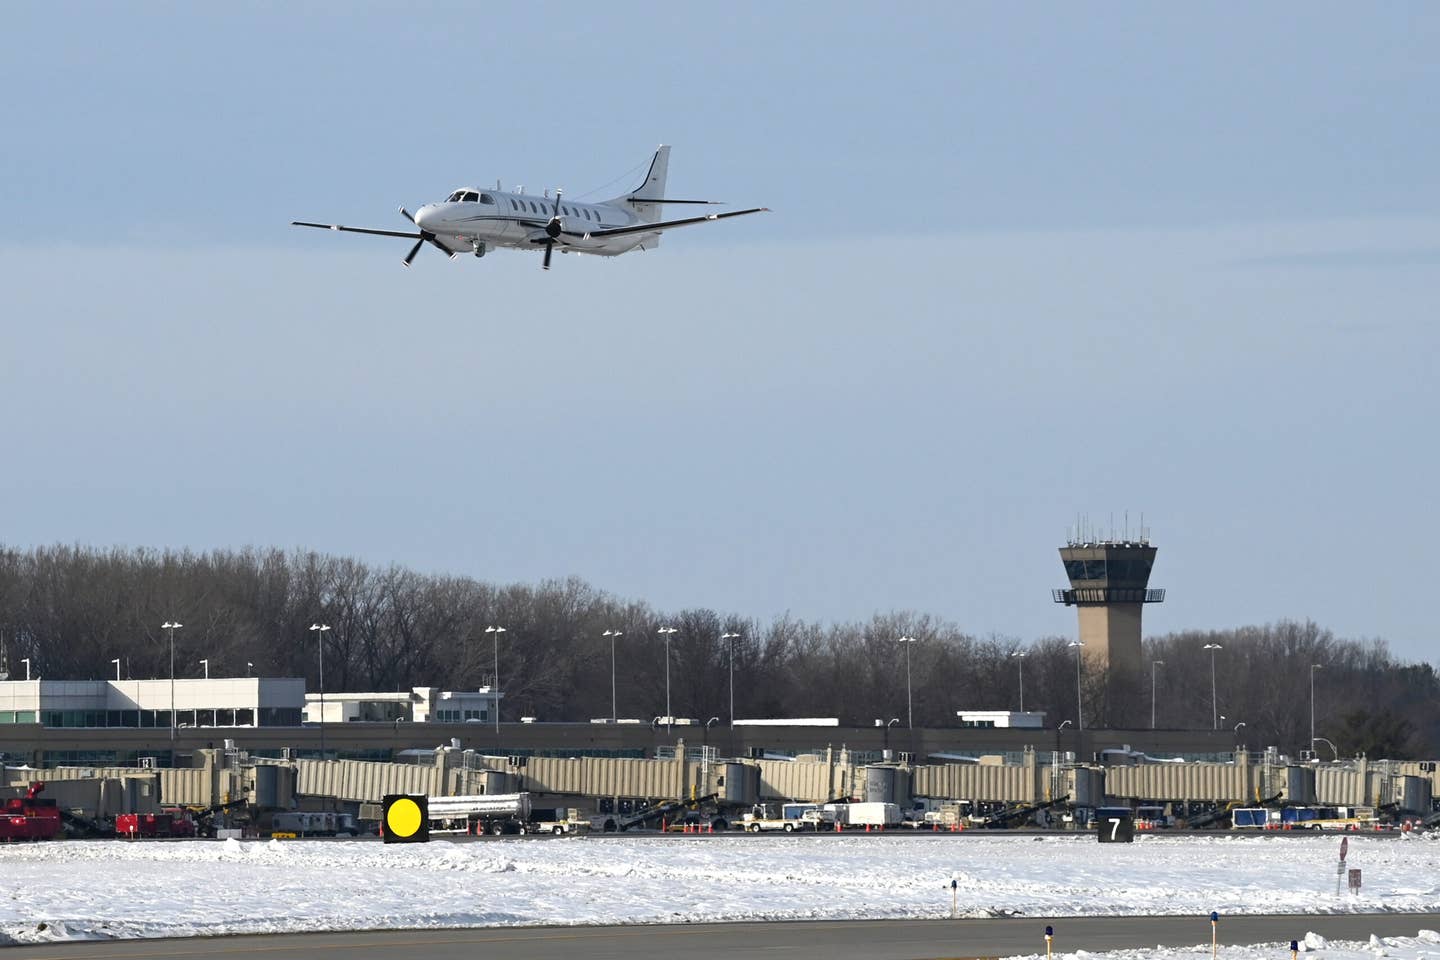 The Wisconsin Air National Guard’s RC-26B makes a final pass over Dane County Regional Airport in Madison, Wisconsin, on December 28, 2022. <em>U.S. Air National Guard photo by Senior Master Sgt. Paul Gorman</em>